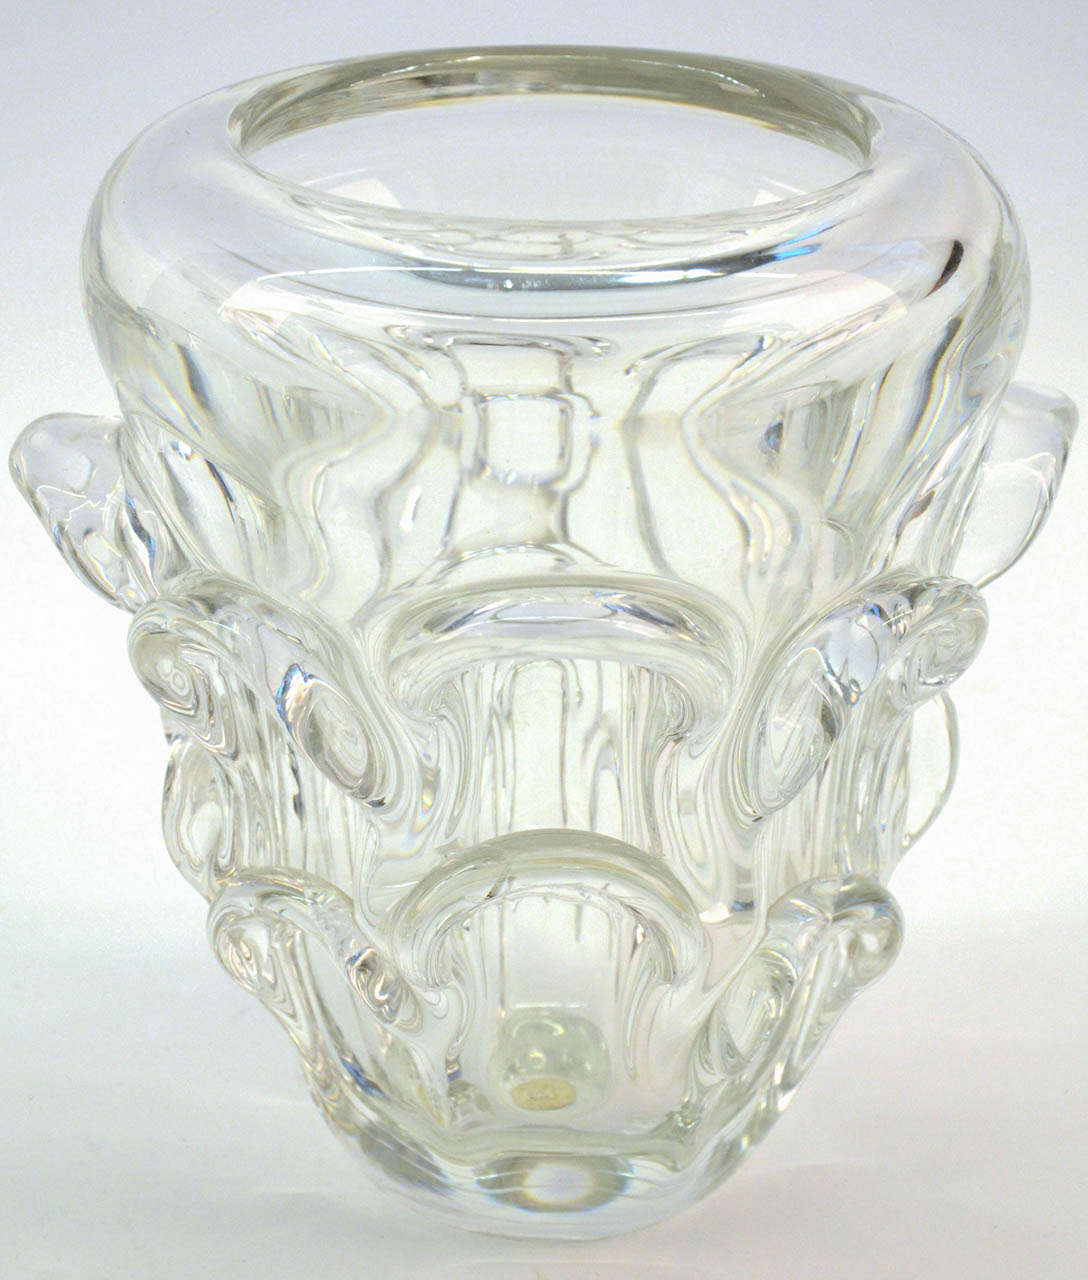 A lovely example from the Belgian glass producer. Solid crystal, signed and stamped.
Please note: This Item is heavy 9.3kg.